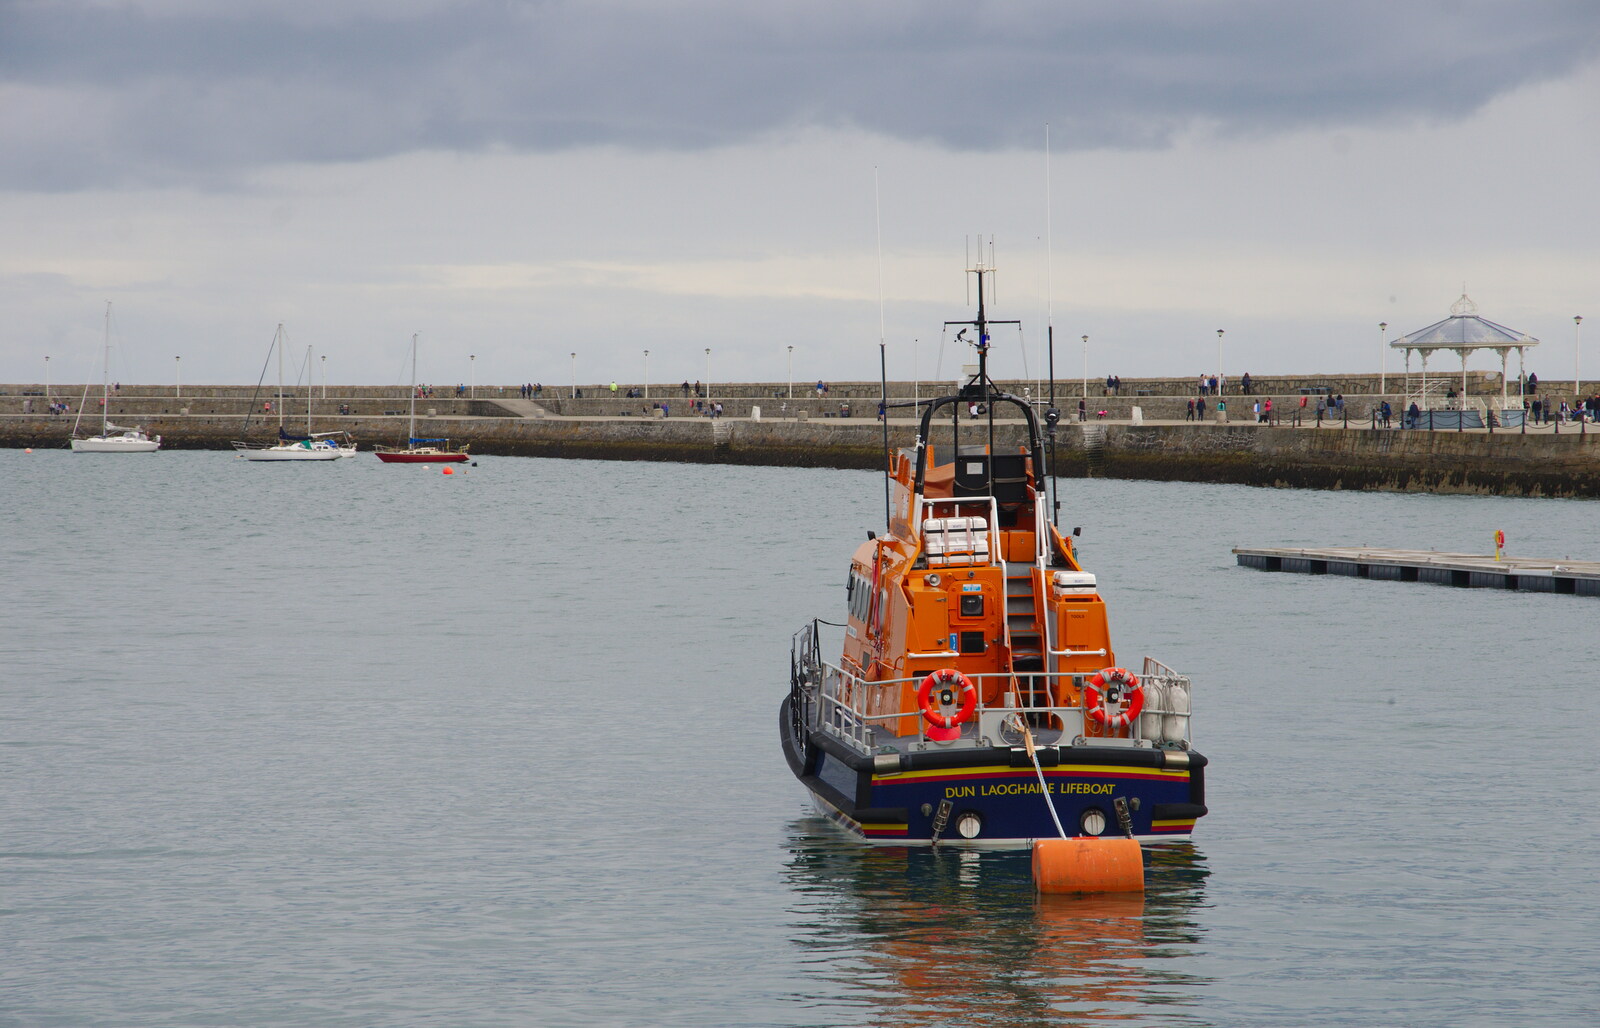 The Dun Laoghaire lifeboat from Jimmy and Catherina's, Ballsbridge, Dublin - 10th August 2019